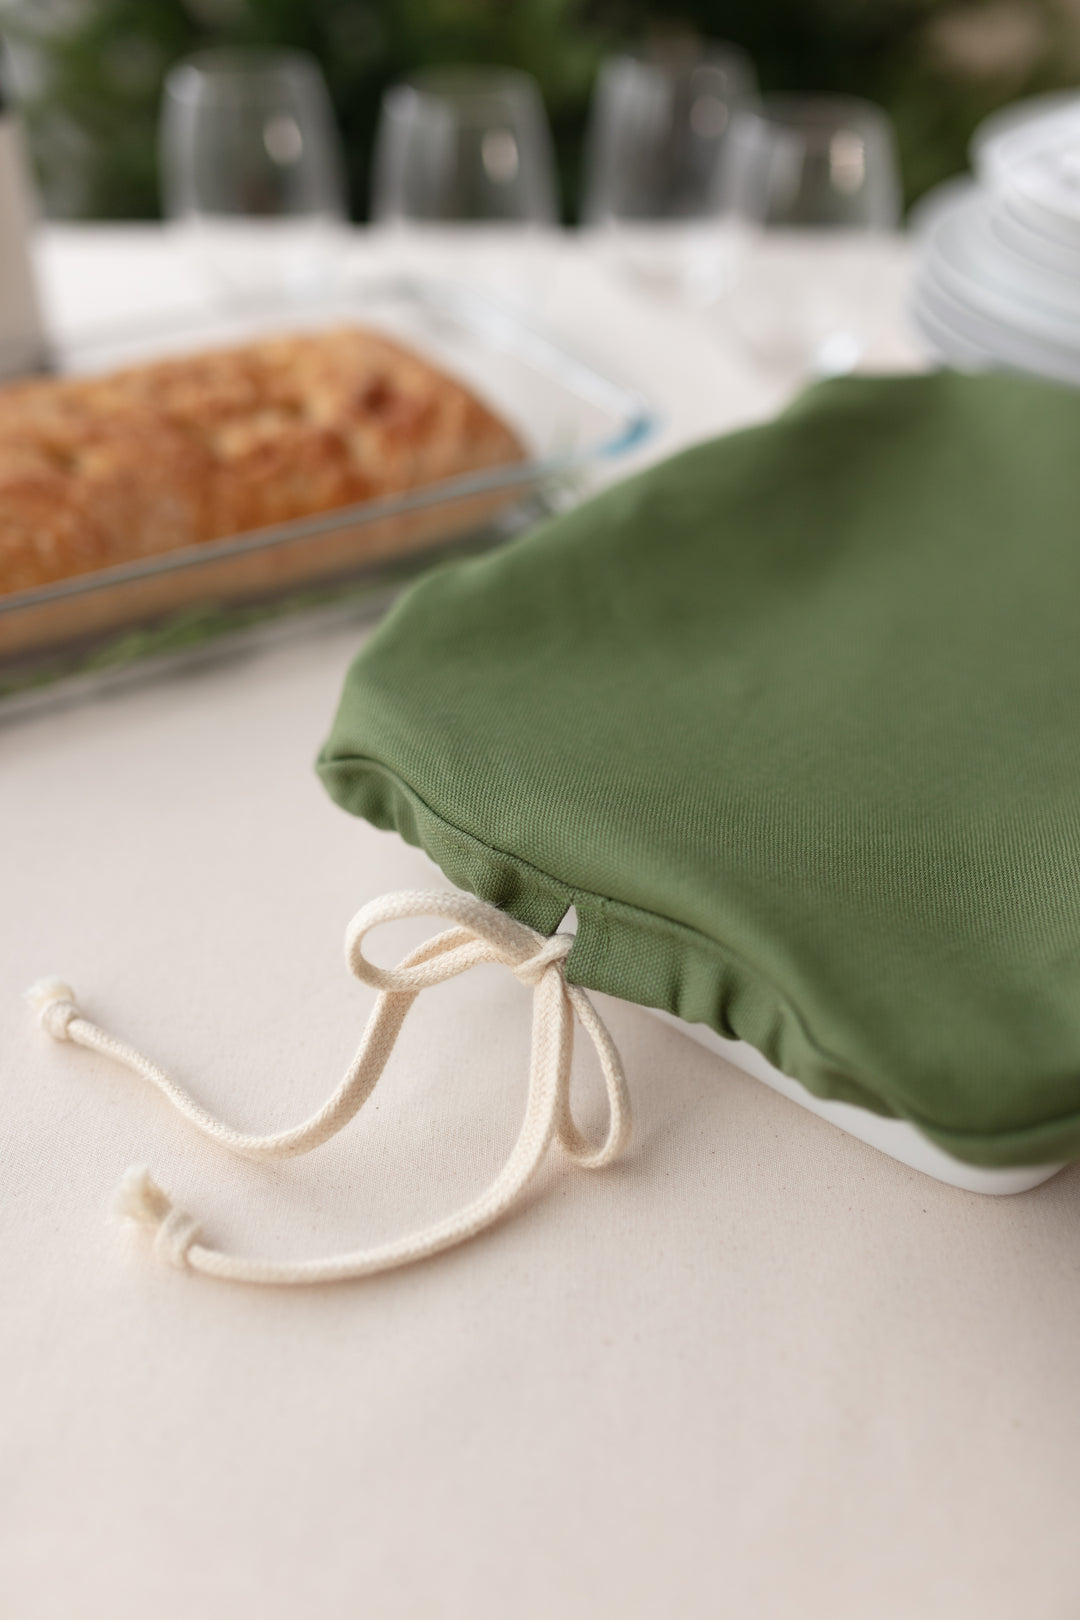 Couvre-Plat Pan Cover Olive| Factory Second